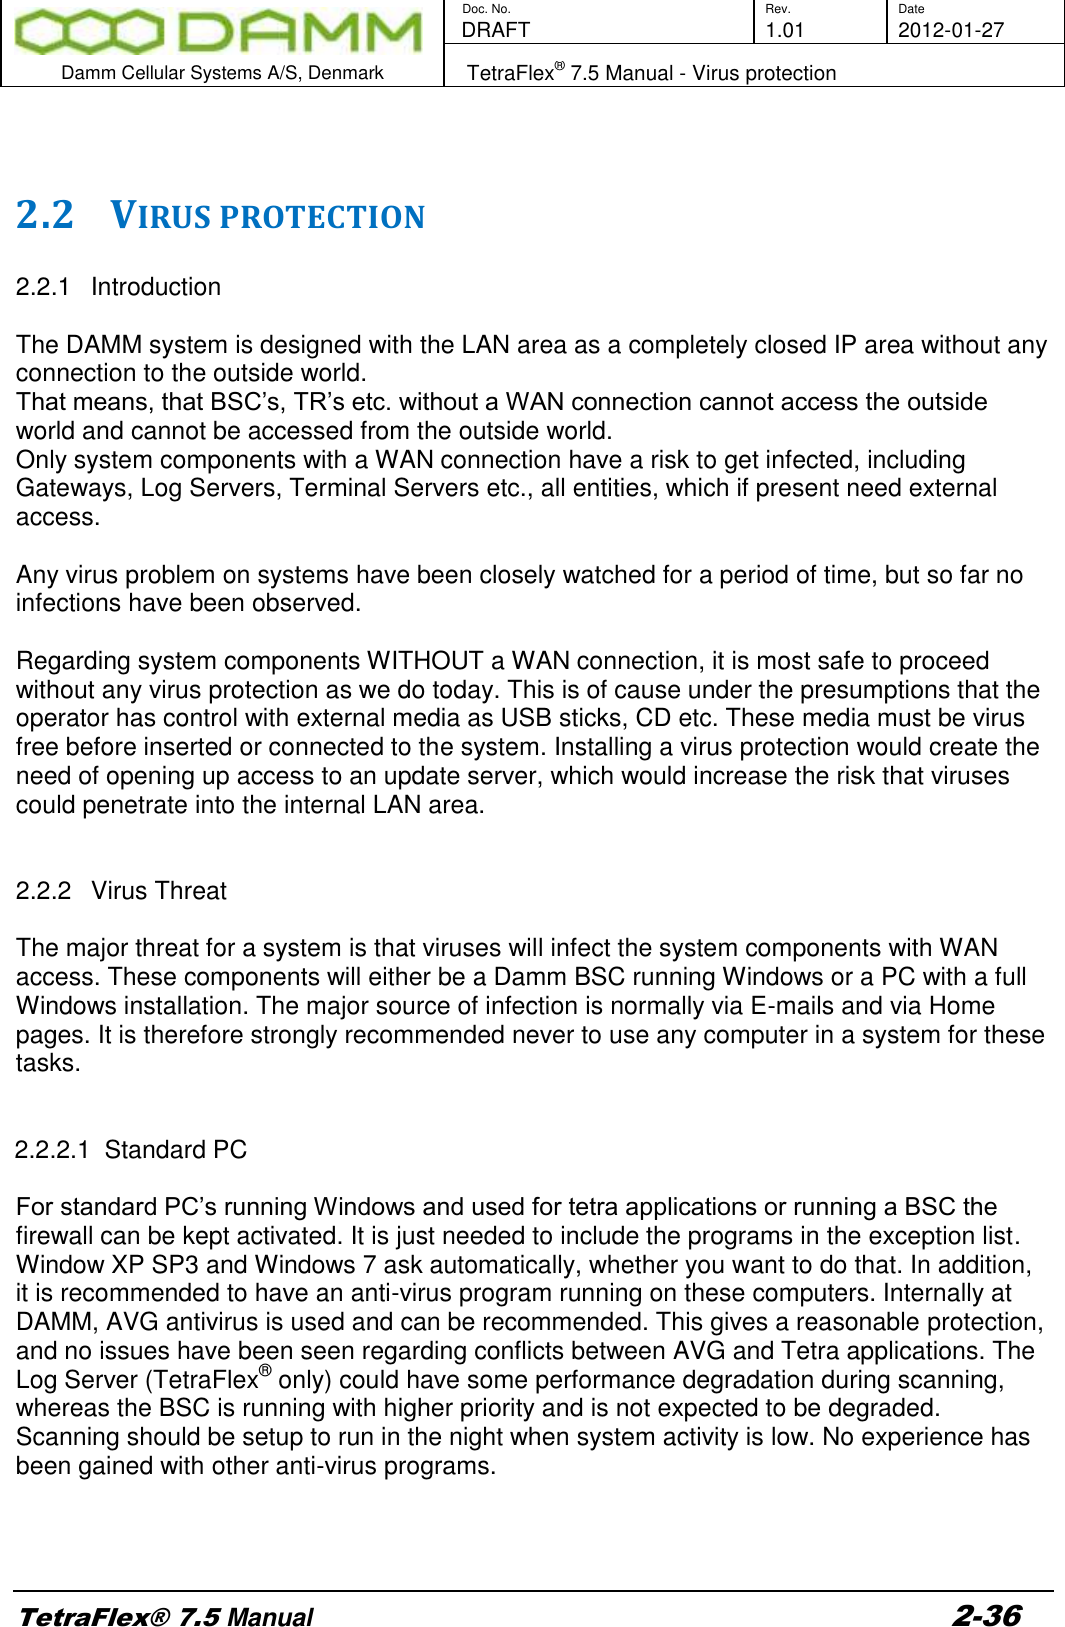        Doc. No. Rev. Date    DRAFT  1.01 2012-01-27  Damm Cellular Systems A/S, Denmark   TetraFlex® 7.5 Manual - Virus protection  TetraFlex® 7.5 Manual 2-36   2.2 VIRUS PROTECTION  2.2.1  Introduction  The DAMM system is designed with the LAN area as a completely closed IP area without any connection to the outside world. That means, that BSC’s, TR’s etc. without a WAN connection cannot access the outside world and cannot be accessed from the outside world. Only system components with a WAN connection have a risk to get infected, including Gateways, Log Servers, Terminal Servers etc., all entities, which if present need external access.  Any virus problem on systems have been closely watched for a period of time, but so far no infections have been observed.  Regarding system components WITHOUT a WAN connection, it is most safe to proceed without any virus protection as we do today. This is of cause under the presumptions that the operator has control with external media as USB sticks, CD etc. These media must be virus free before inserted or connected to the system. Installing a virus protection would create the need of opening up access to an update server, which would increase the risk that viruses could penetrate into the internal LAN area.   2.2.2  Virus Threat  The major threat for a system is that viruses will infect the system components with WAN access. These components will either be a Damm BSC running Windows or a PC with a full Windows installation. The major source of infection is normally via E-mails and via Home pages. It is therefore strongly recommended never to use any computer in a system for these tasks.   2.2.2.1  Standard PC  For standard PC’s running Windows and used for tetra applications or running a BSC the firewall can be kept activated. It is just needed to include the programs in the exception list. Window XP SP3 and Windows 7 ask automatically, whether you want to do that. In addition, it is recommended to have an anti-virus program running on these computers. Internally at DAMM, AVG antivirus is used and can be recommended. This gives a reasonable protection, and no issues have been seen regarding conflicts between AVG and Tetra applications. The Log Server (TetraFlex® only) could have some performance degradation during scanning, whereas the BSC is running with higher priority and is not expected to be degraded. Scanning should be setup to run in the night when system activity is low. No experience has been gained with other anti-virus programs.    